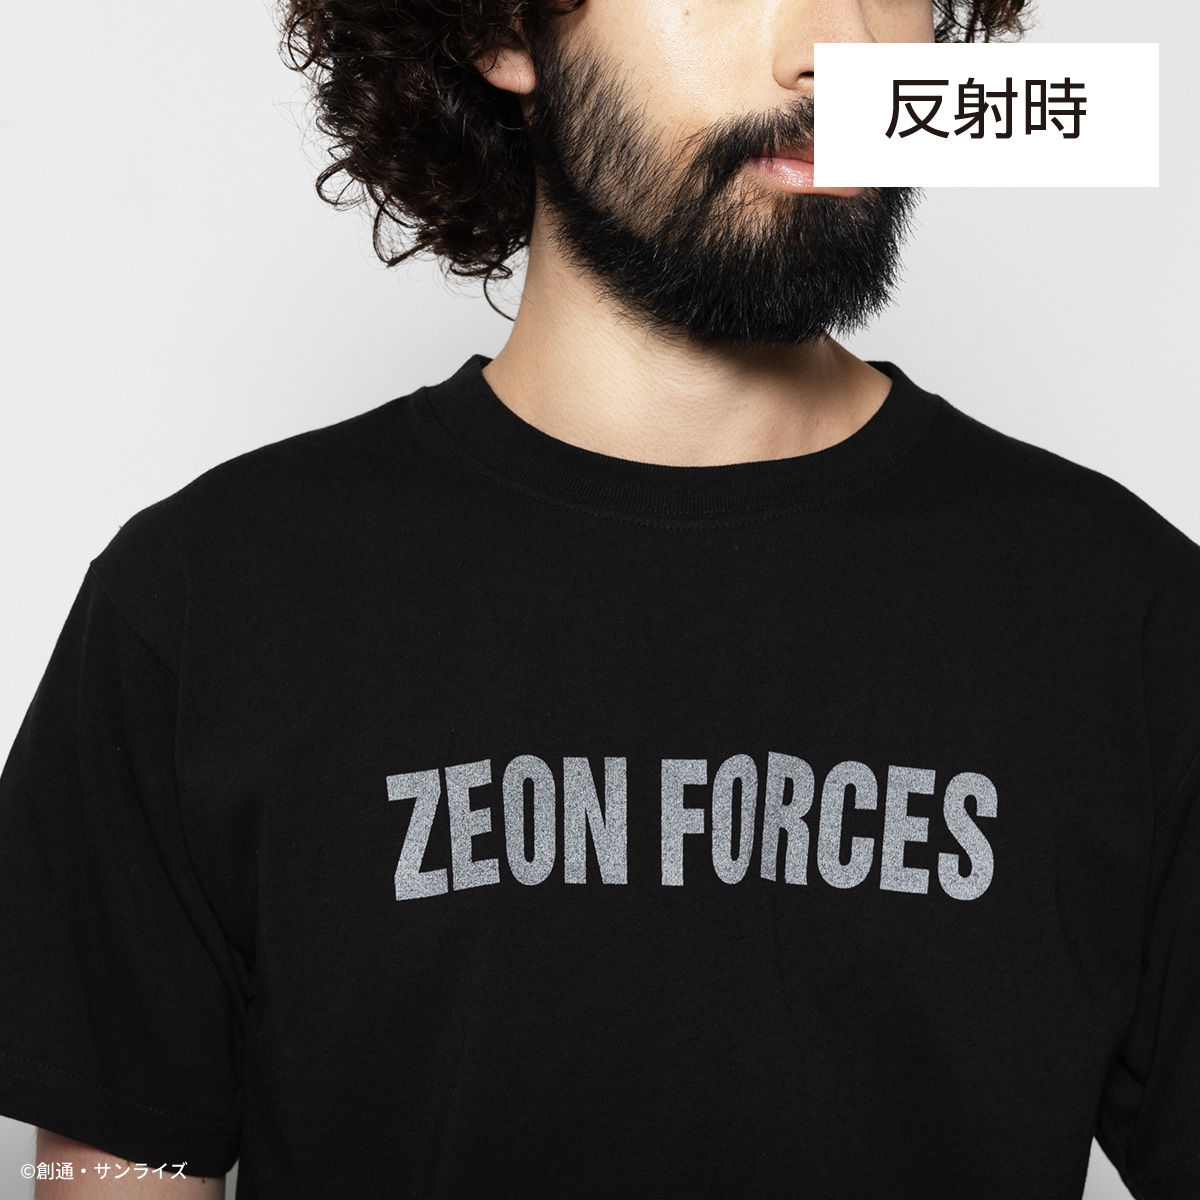 STRICT-G.ARMS『機動戦士ガンダム』半袖Tシャツ リフレクタープリント ZEON FORCES